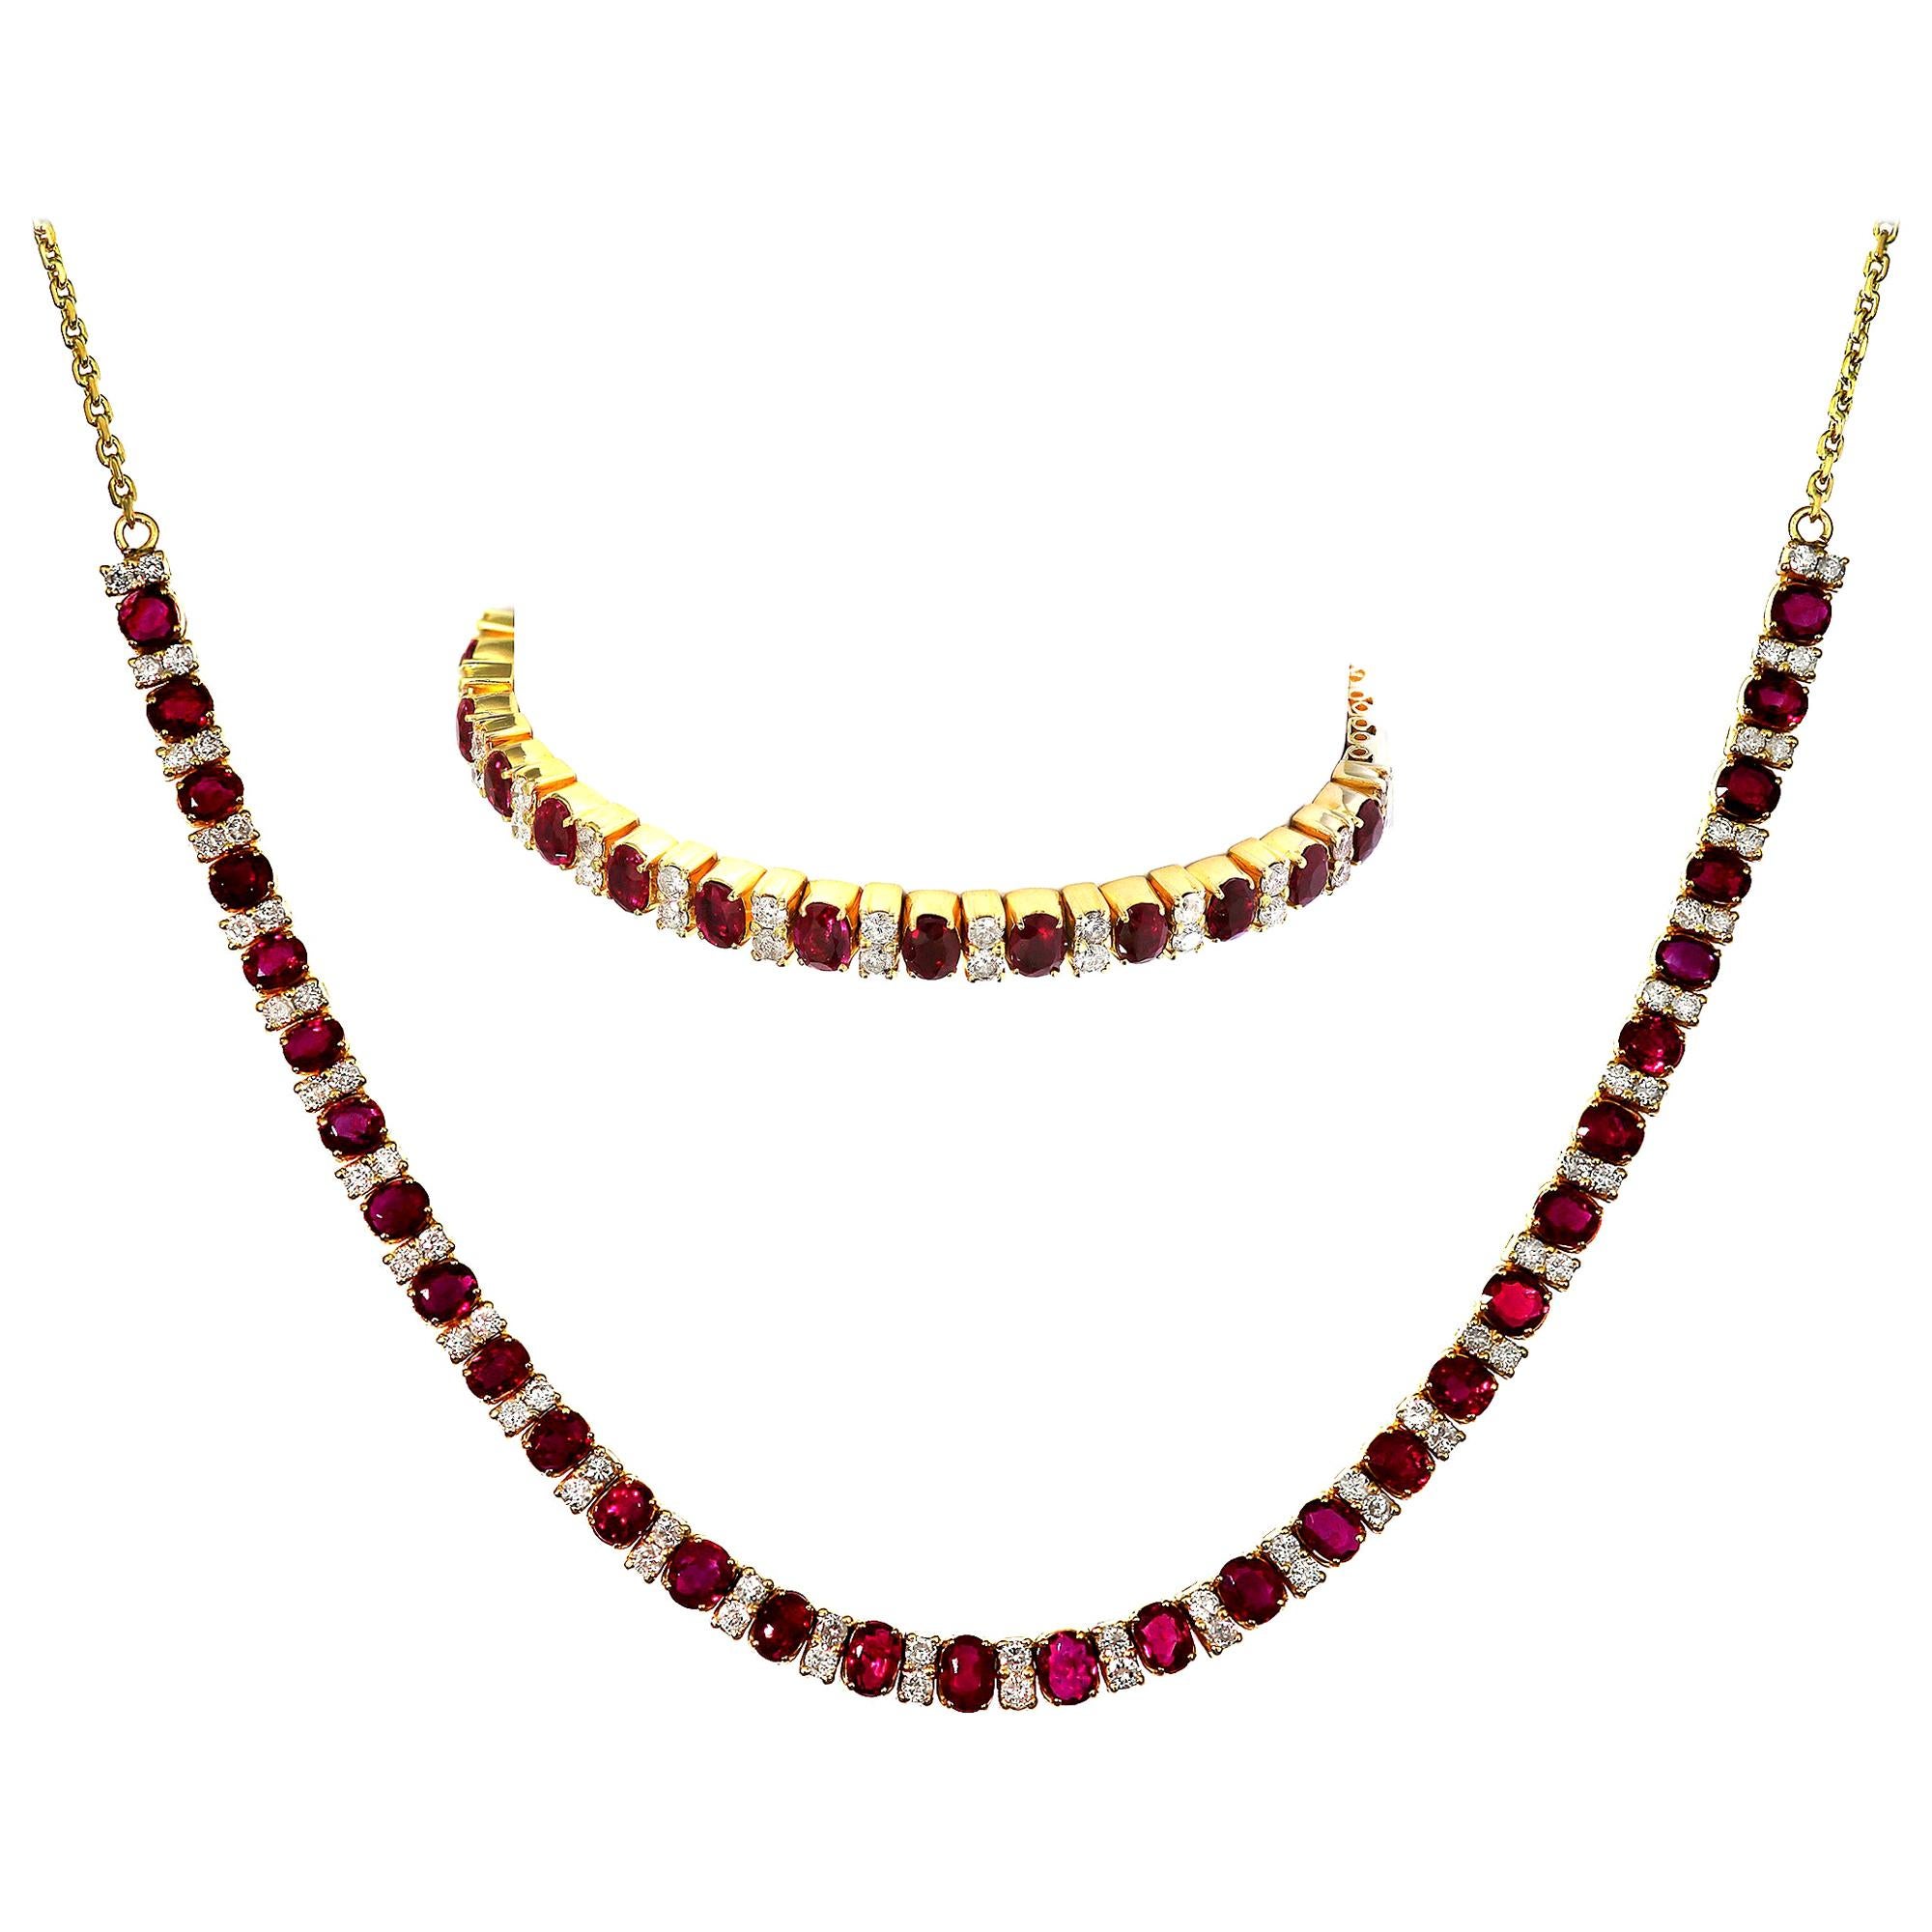 GCS Certified Natural Burmese/Myanmar Ruby & Diamond Necklace and Bracelet  For Sale